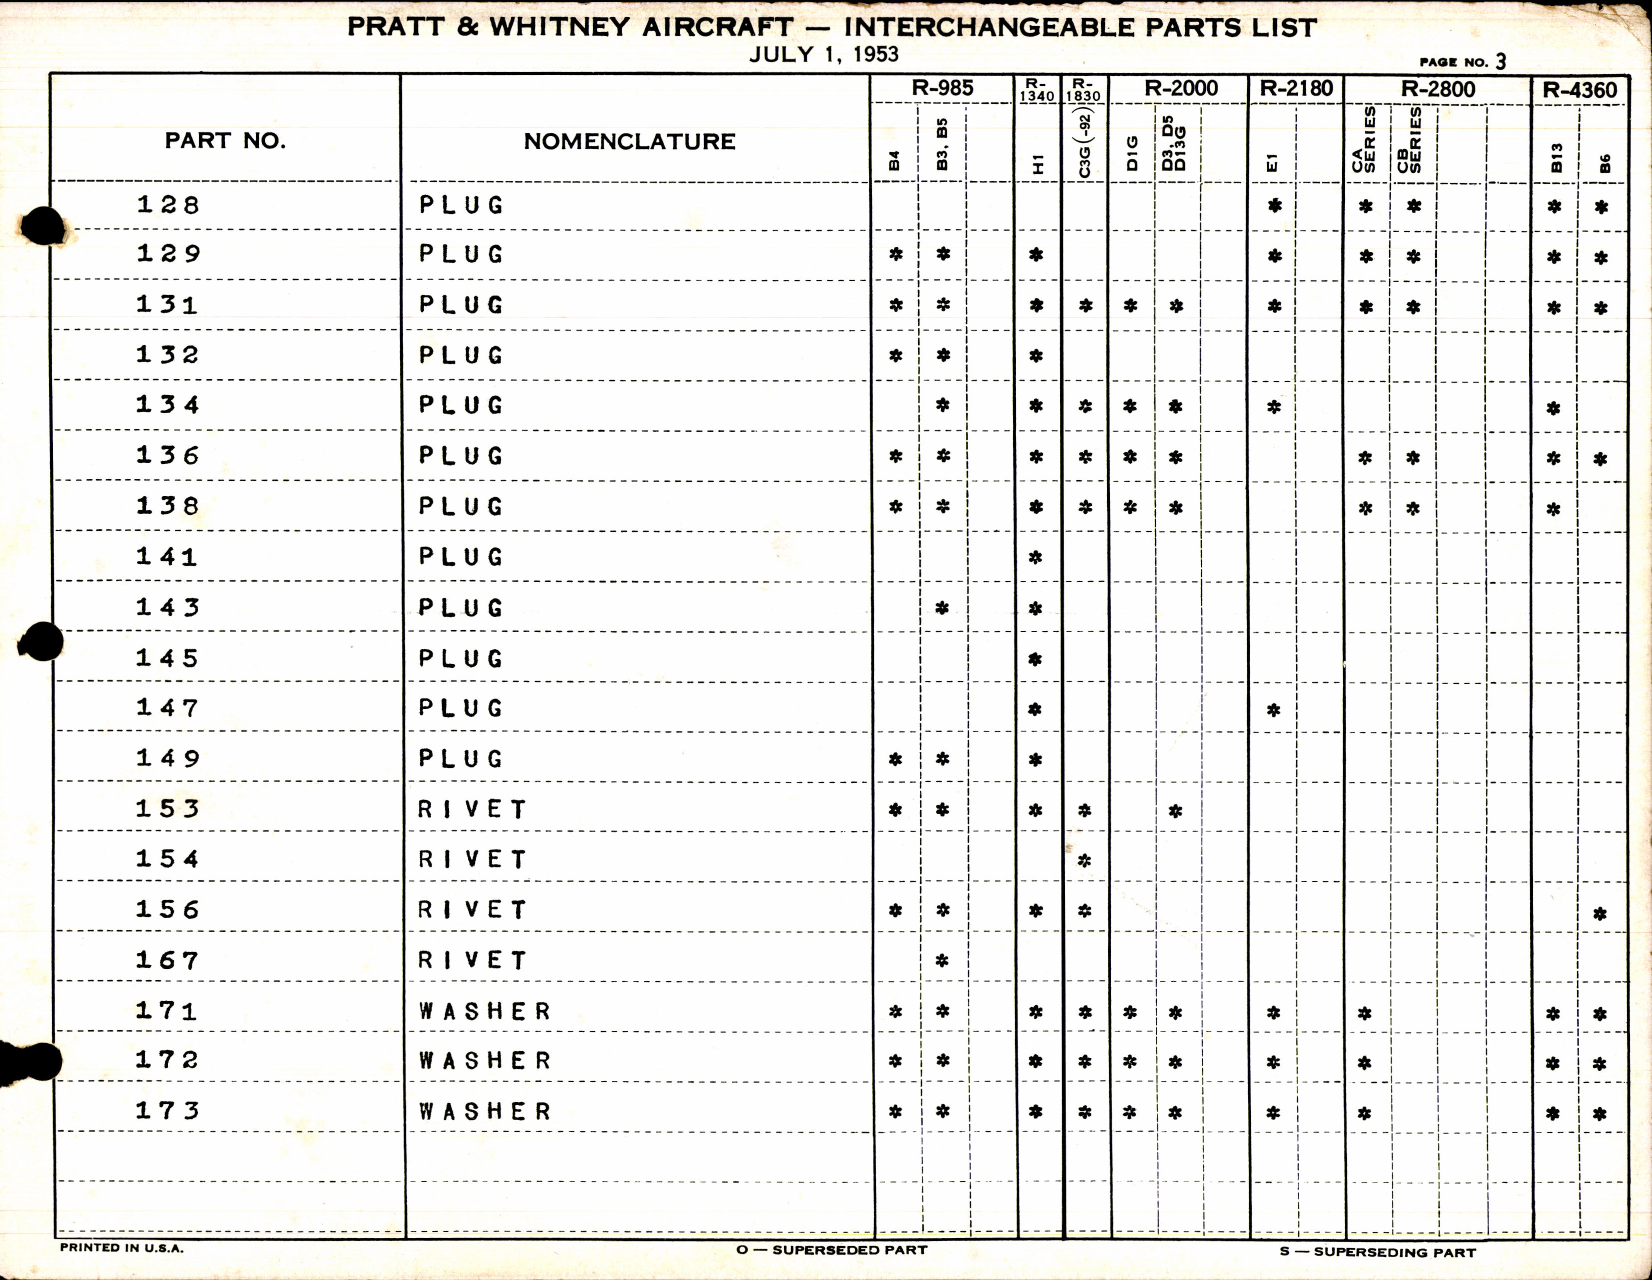 Sample page 7 from AirCorps Library document: Interchangeable Parts List